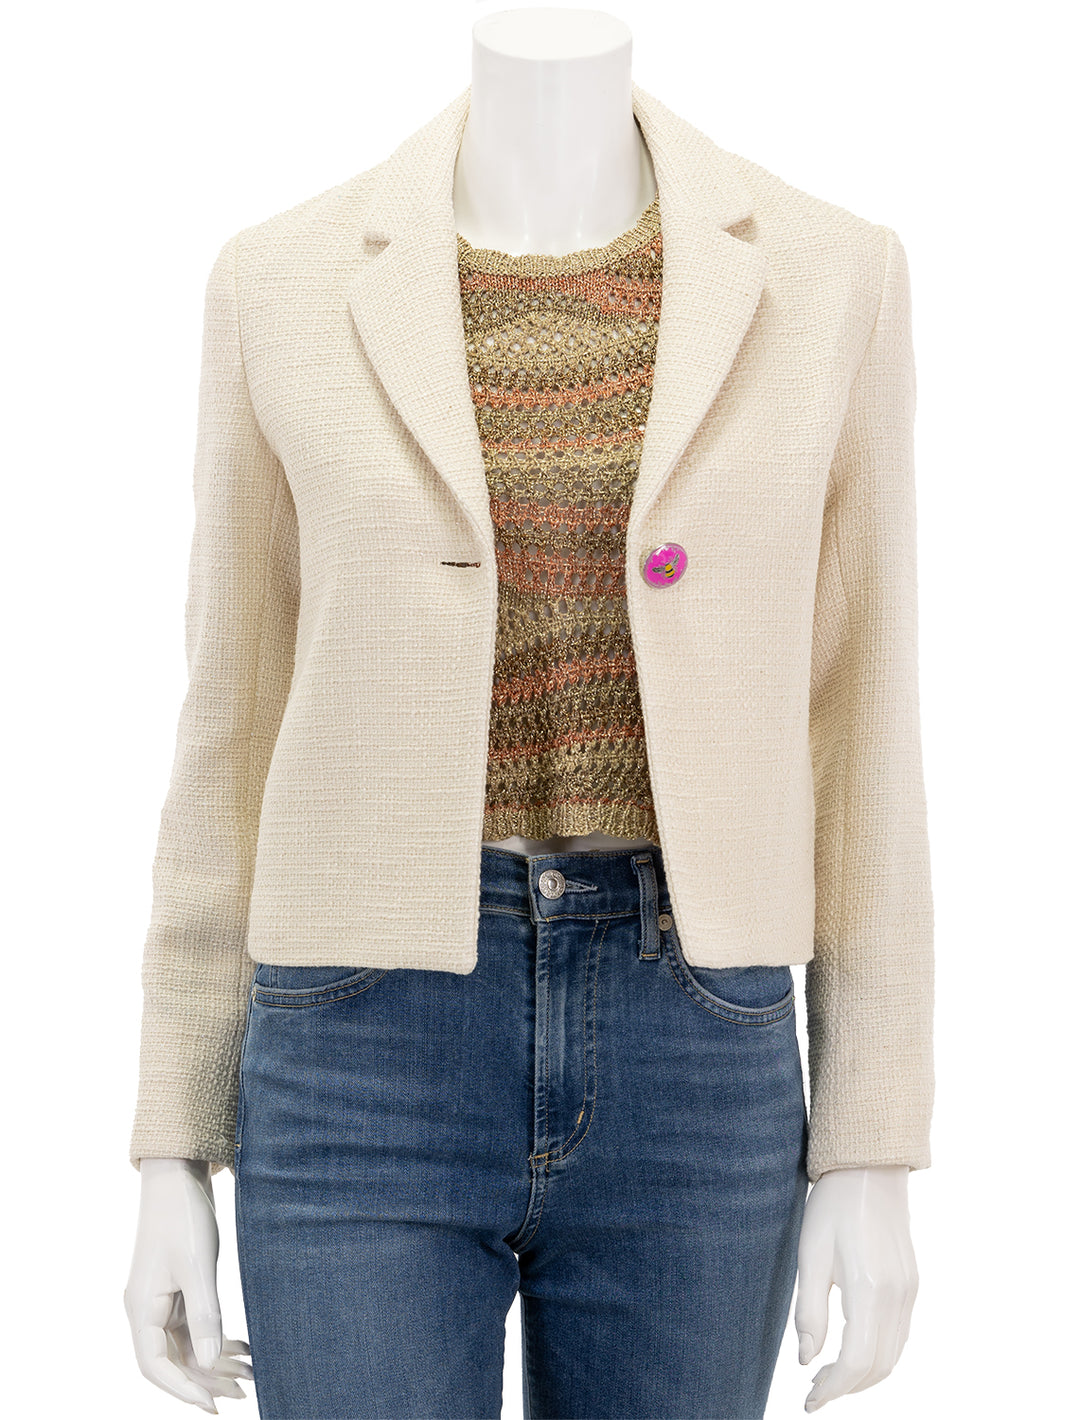 Front view of Vilagallo's imma jacket in ivory, unbuttoned.